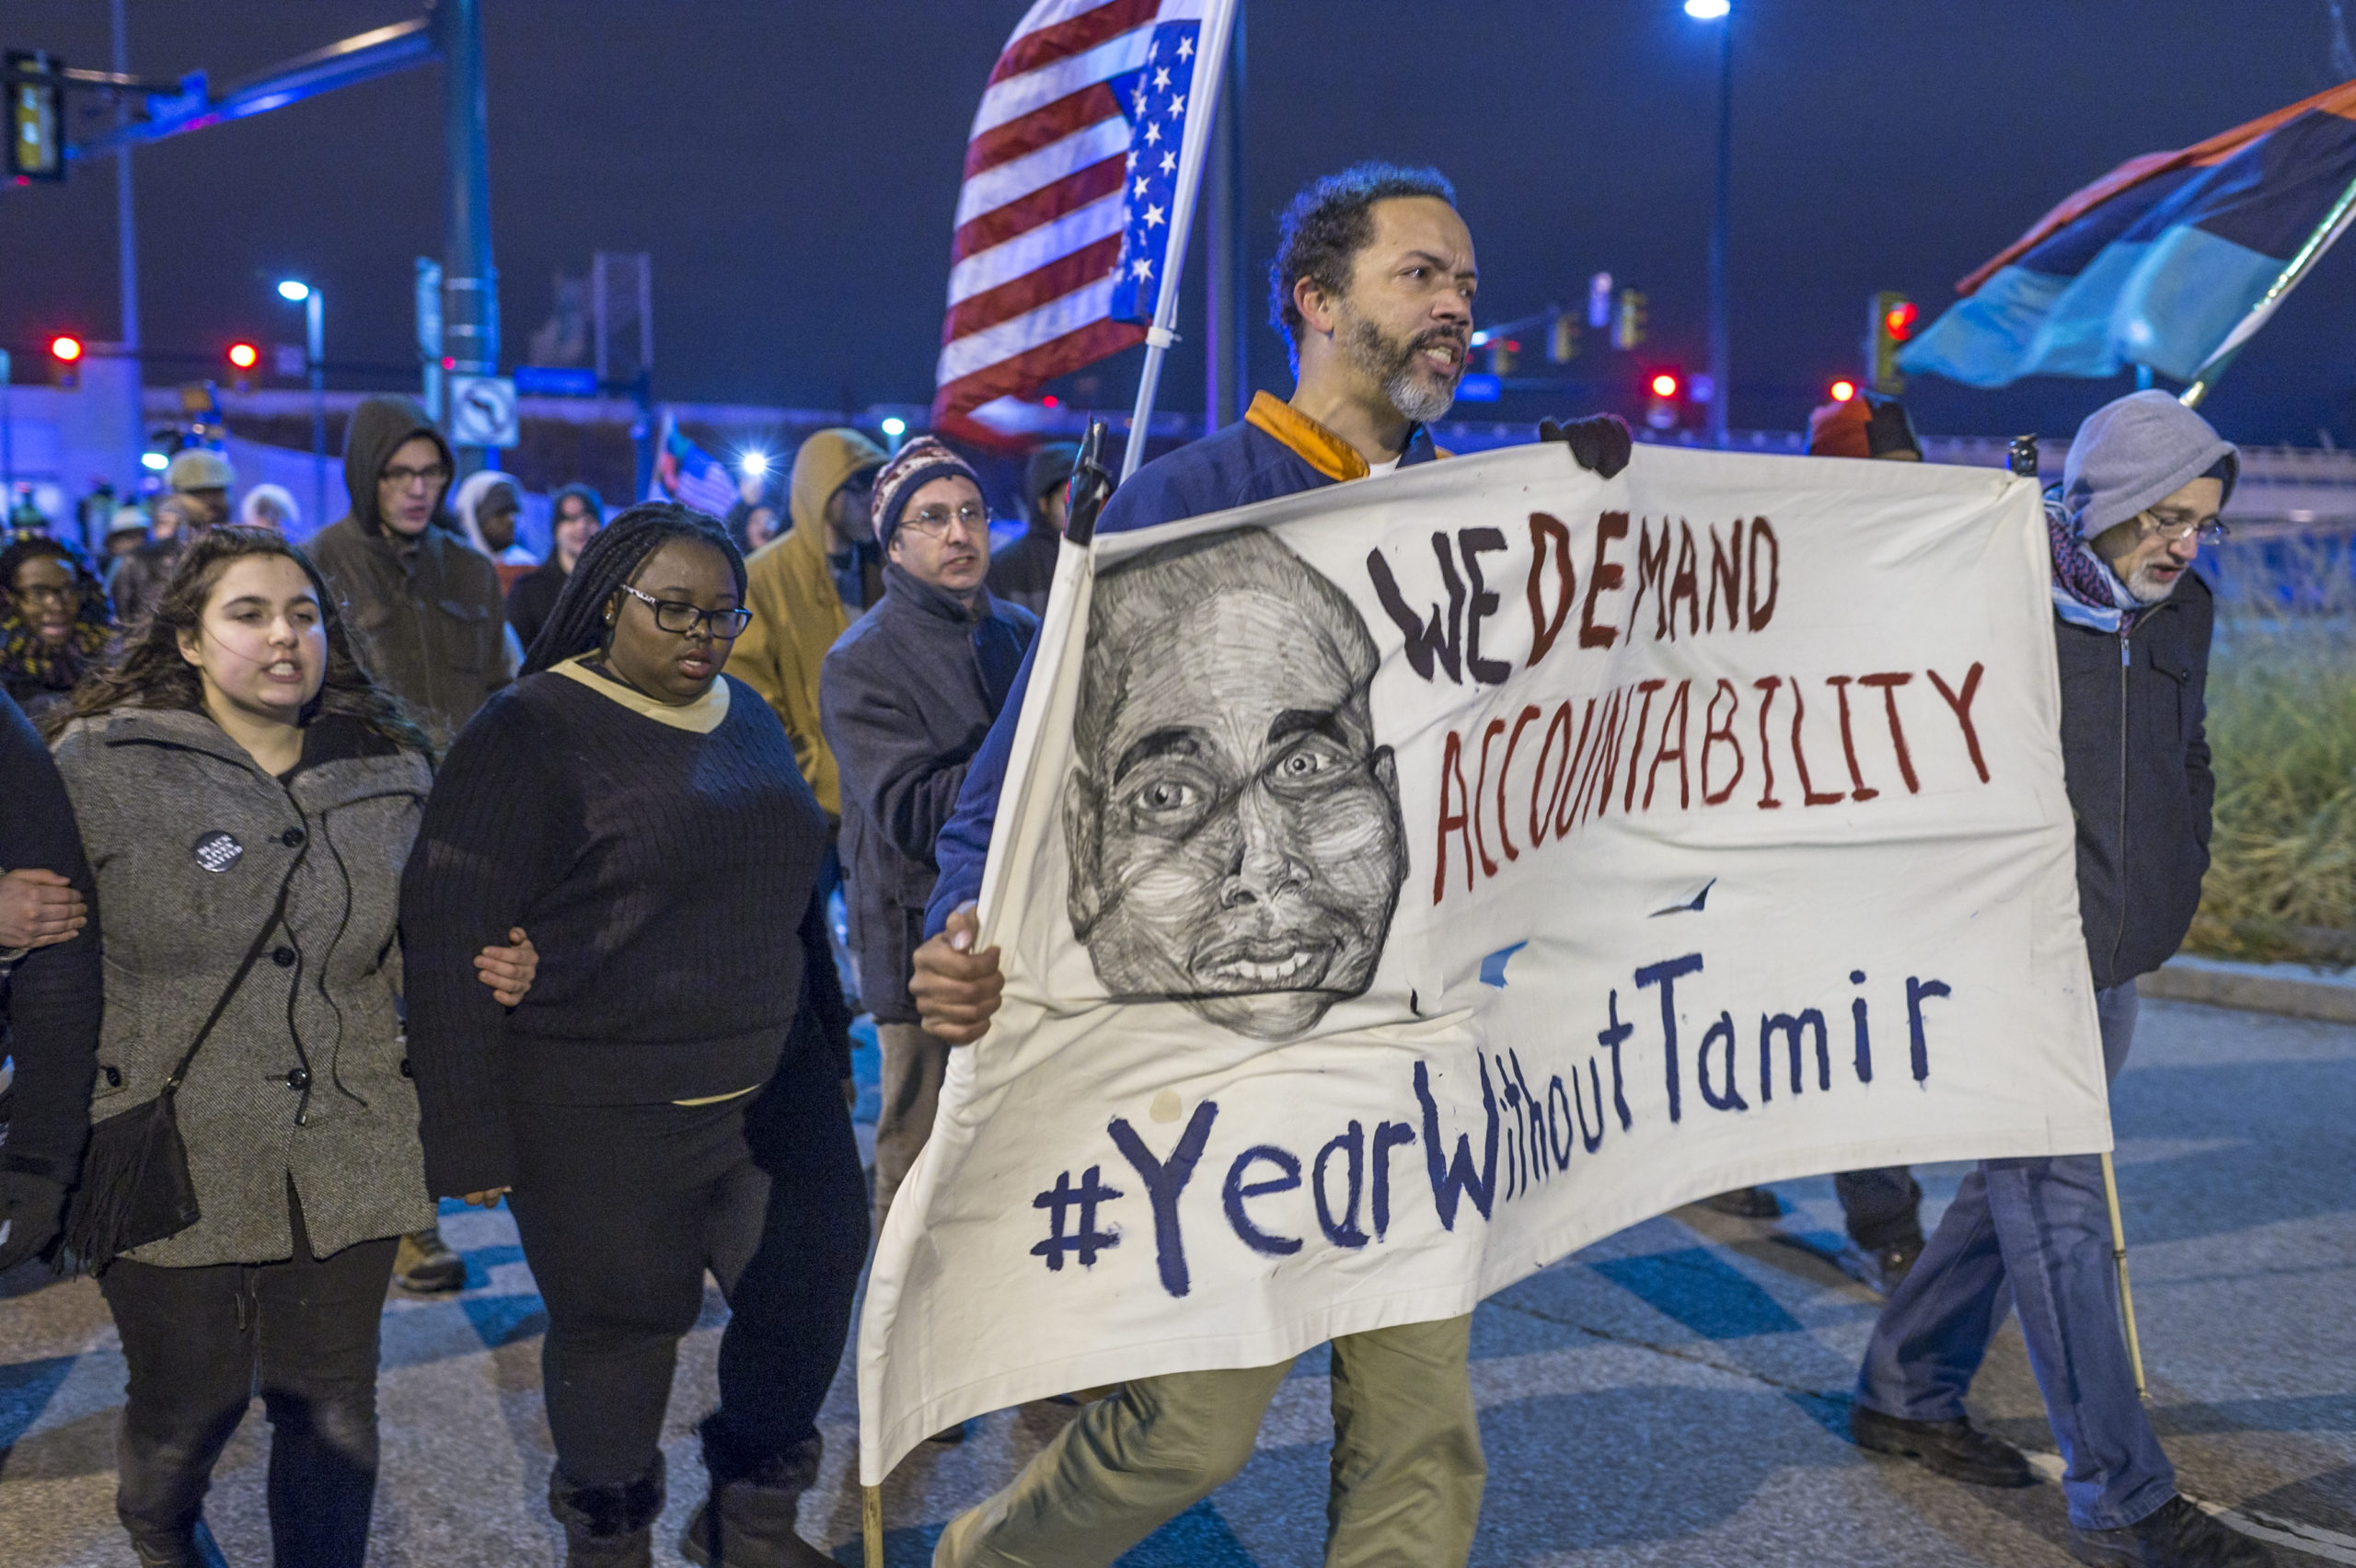 Demonstrators march in Cleveland, Ohio after a grand jury declined to indict Cleveland Police officer Timothy Loehmann for the fatal shooting of Tamir Rice. (Angelo Merendino/Getty Images)